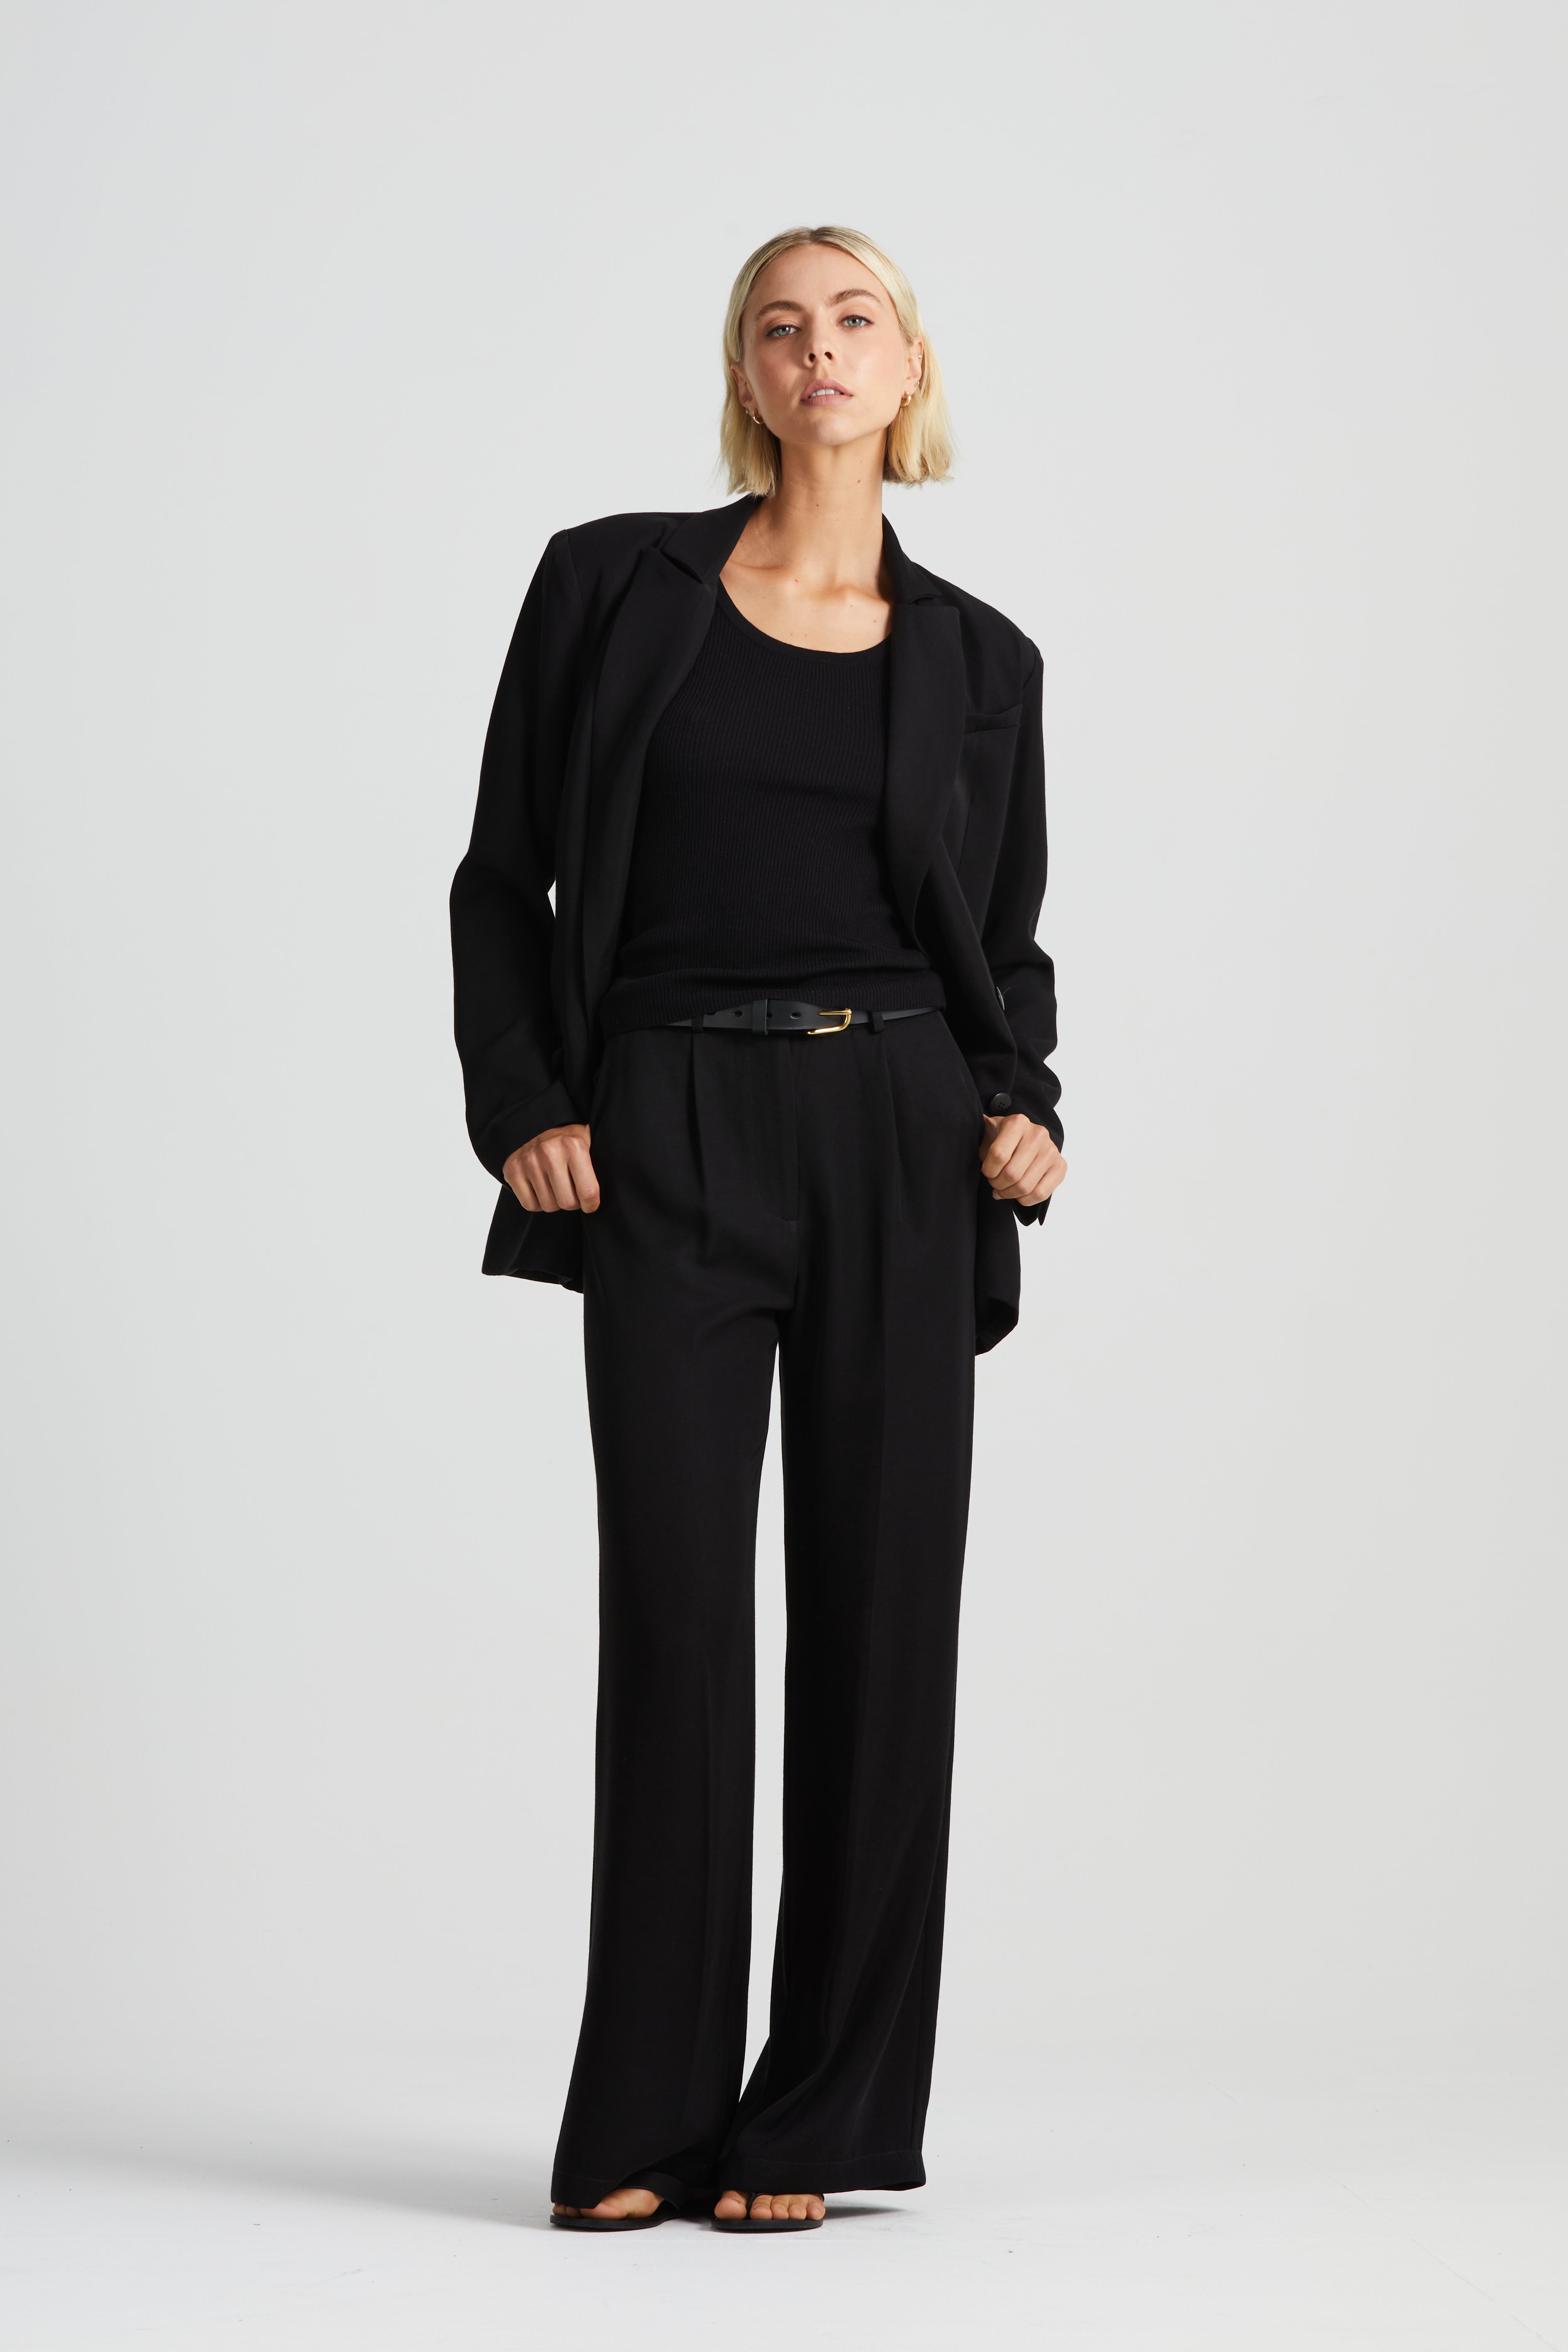 The Signature Relaxed Double-Breasted Blazer | Black Twill $720